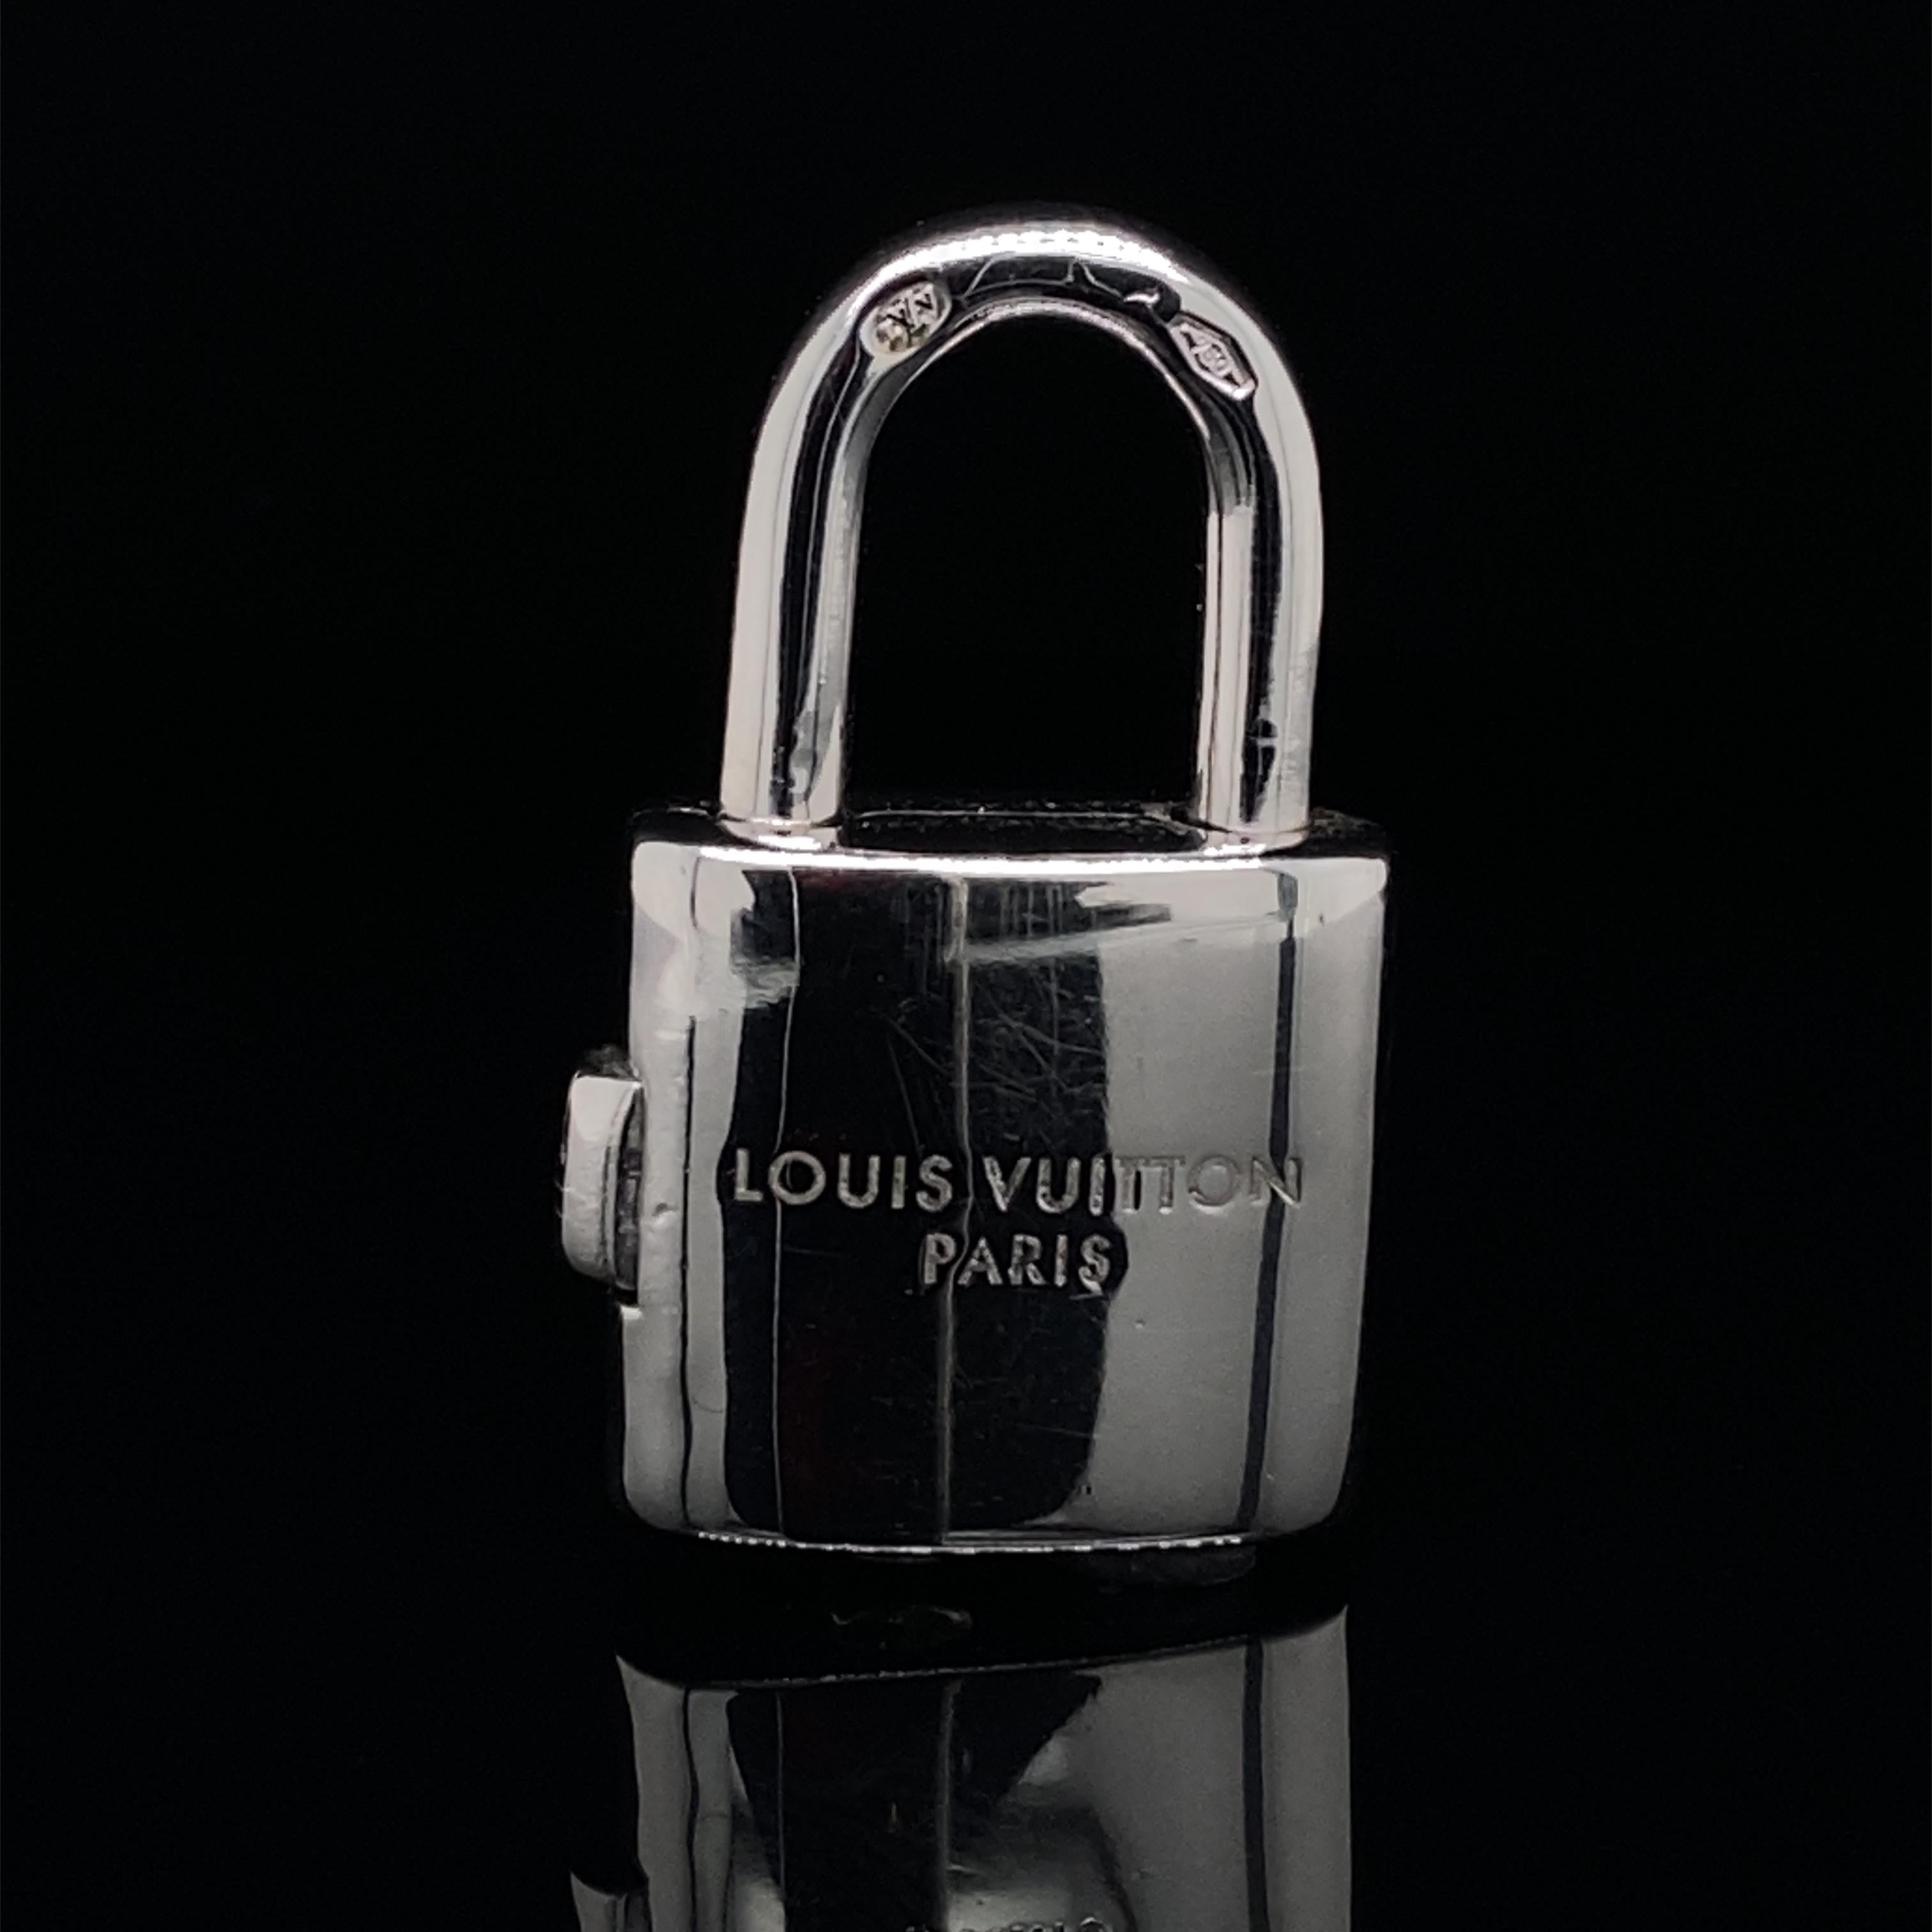 A Louis Vuitton 18 karat white gold padlock charm with chain.

This sweet charm has a release catch to its side which opens up the padlock allowing it to be attached to a bracelet or chain. It currently sits on a fine 16 inch 18 karat white gold